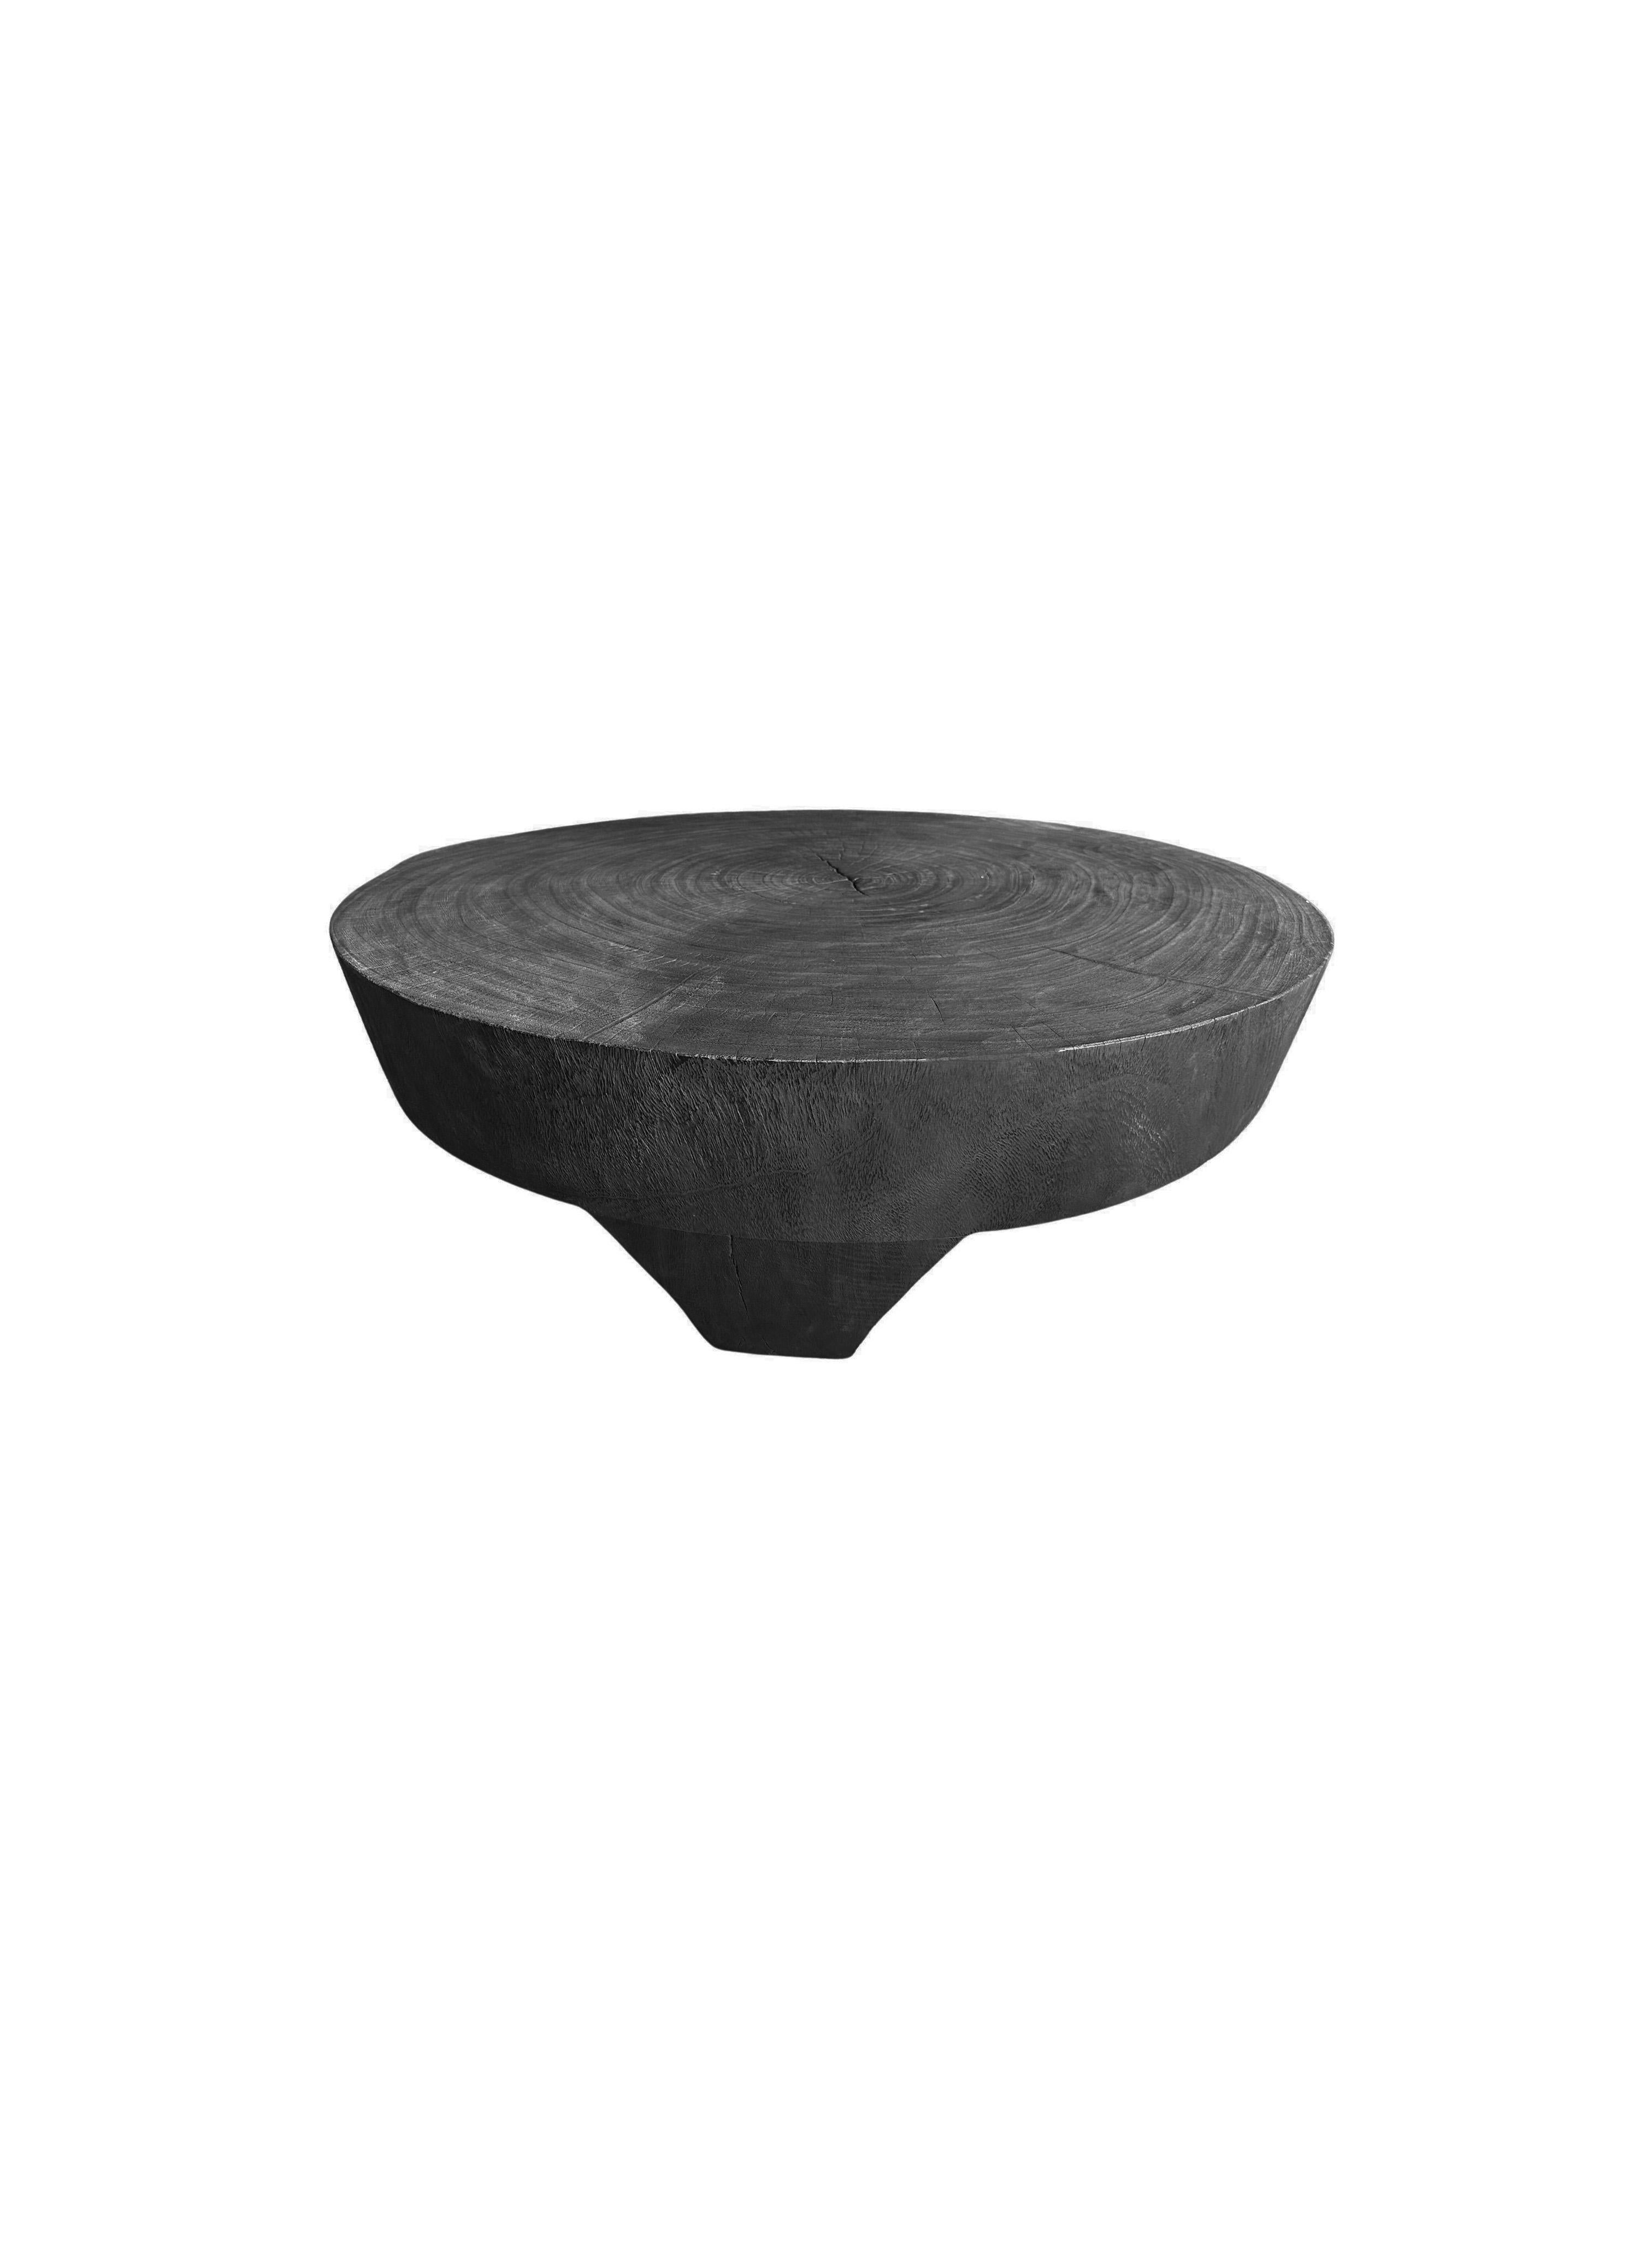 Organic Modern Solid Sculptural Suar Wood Round Table, Burnt Finish, Modern Organic For Sale